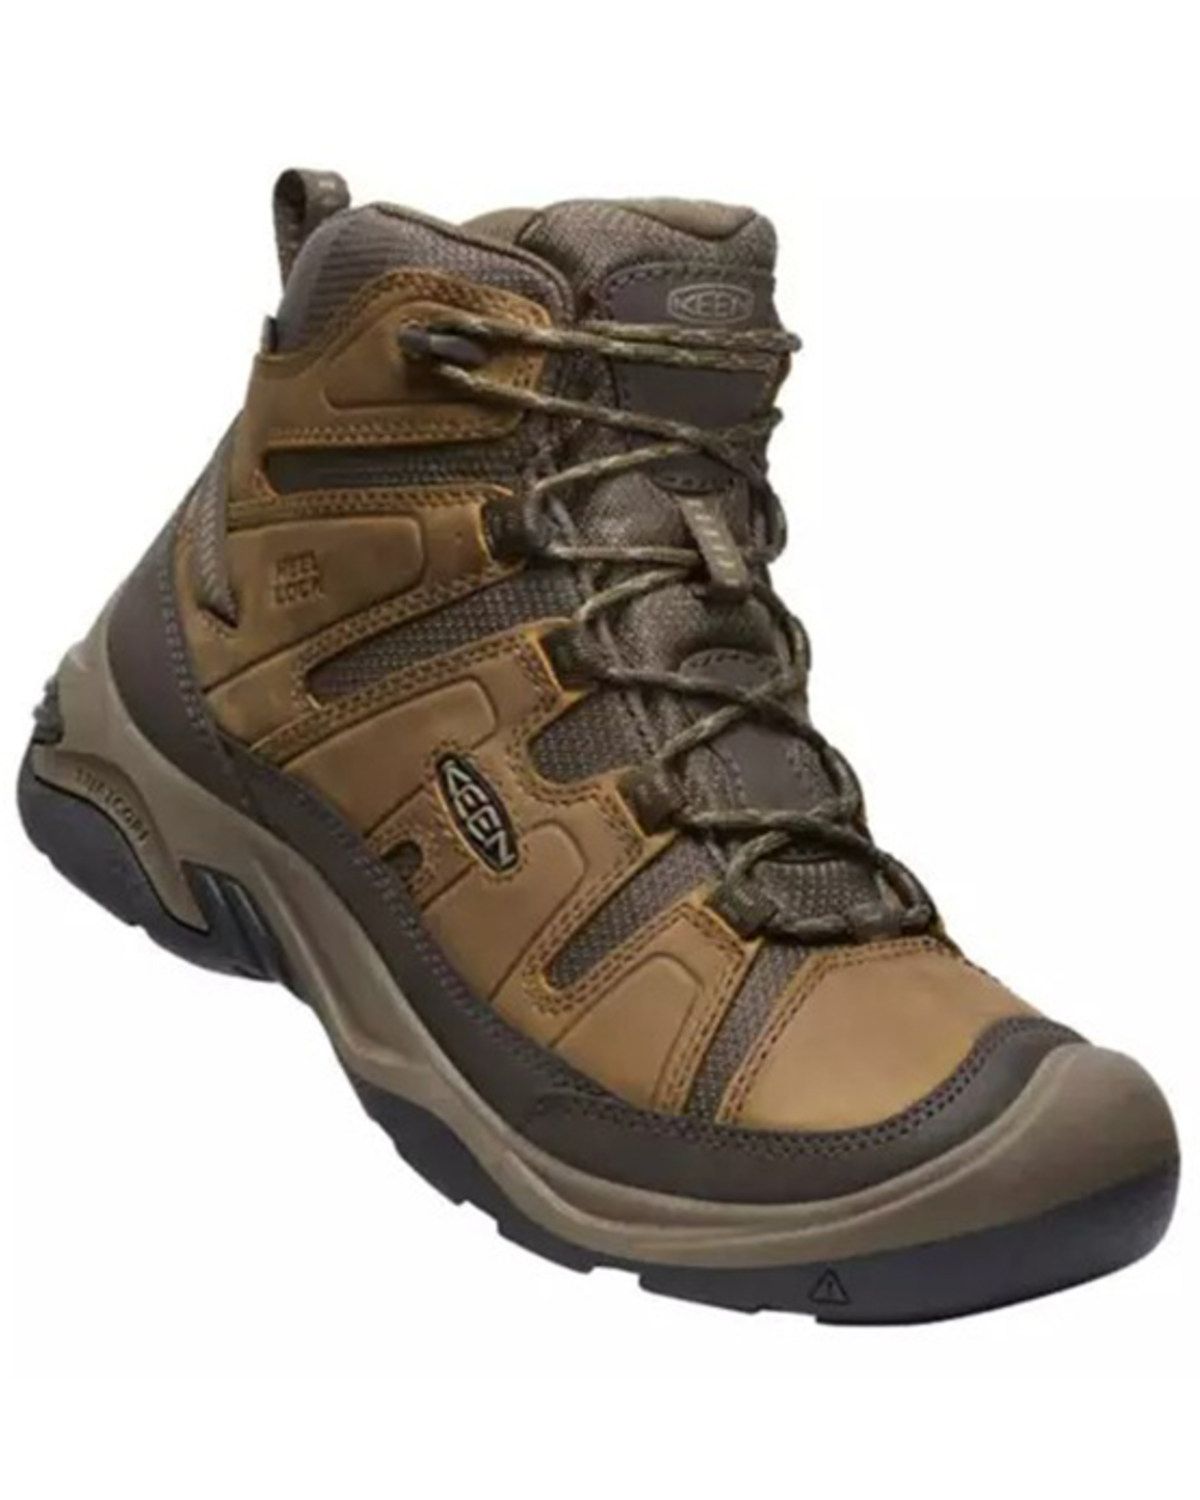 Keen Men's Circadia Mid Waterproof Lace-Up Hiking Boots - Round toe